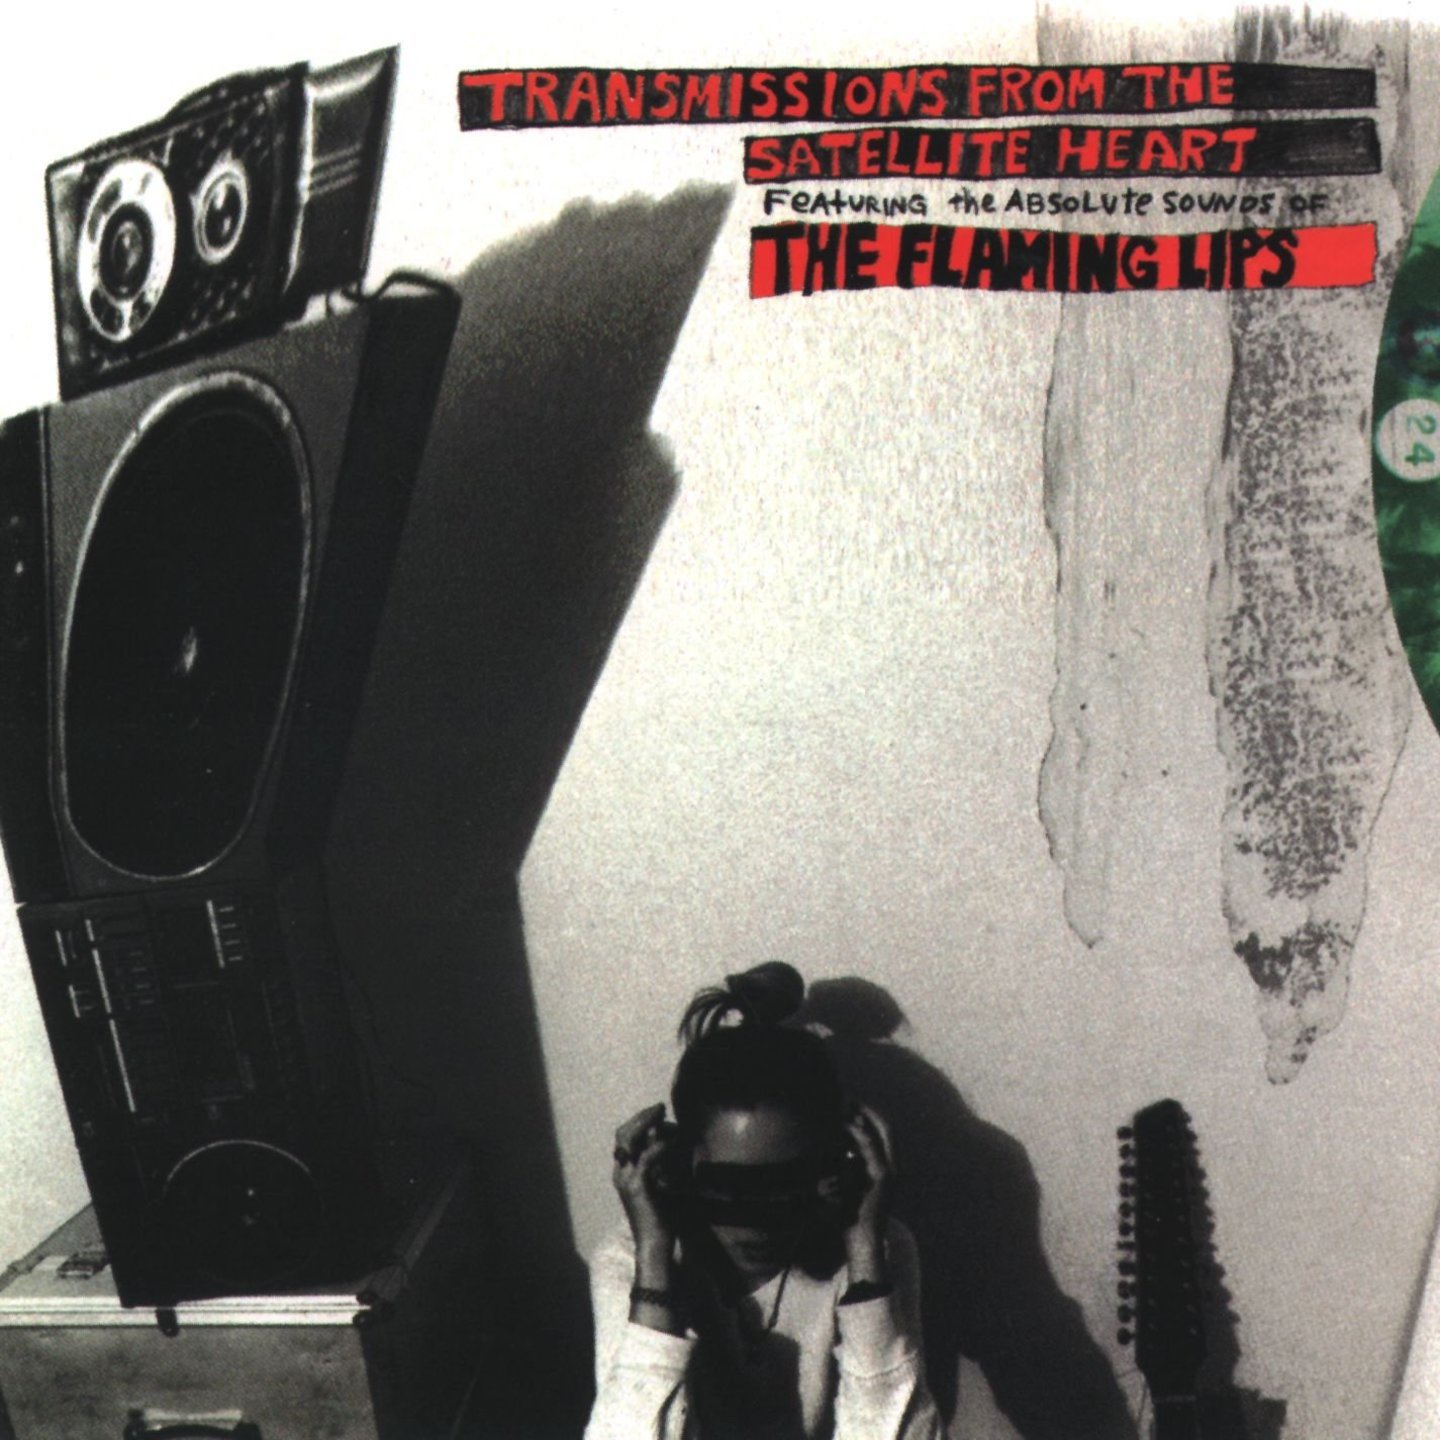 FLAMING LIPS, THE - Transmissions From The Satellite Heart LP